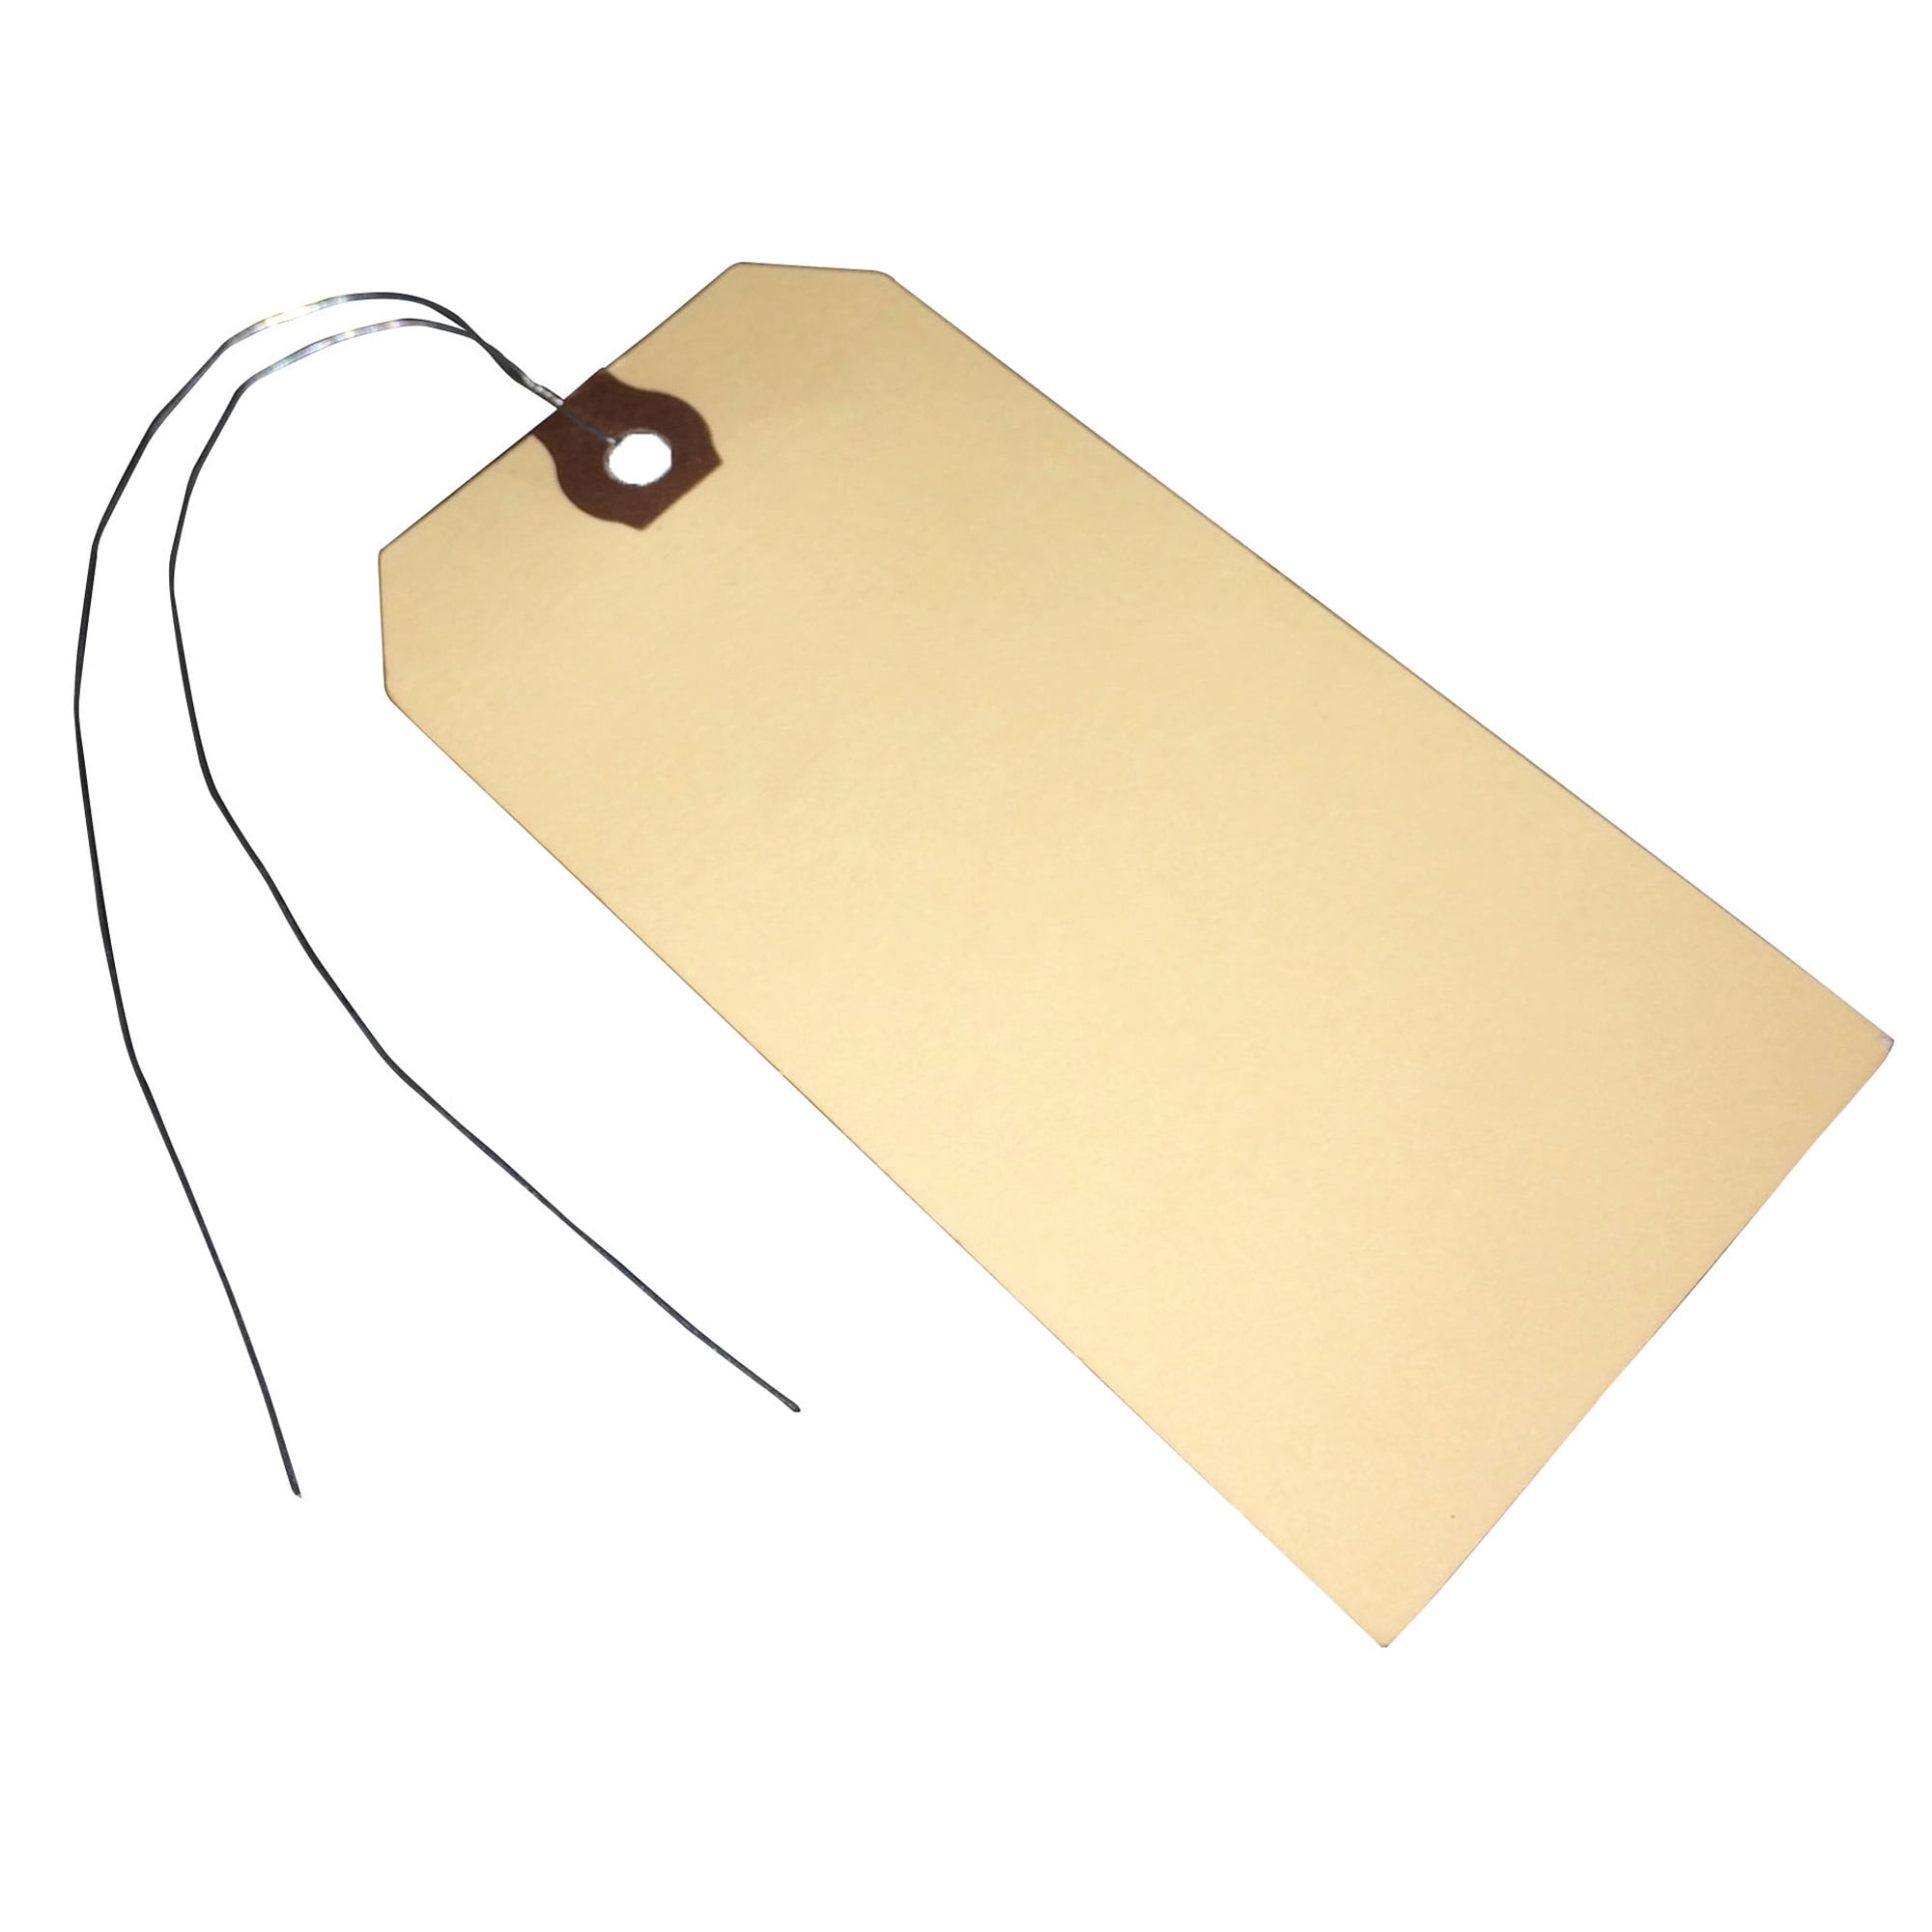 240 Pcs 4 3/4-in x 2 3/8-in Price Tags Manila Labels Shipping Tags Gift  Tags with String Attached Luggage Paper Tag Inventory Tags Cardboard Tags